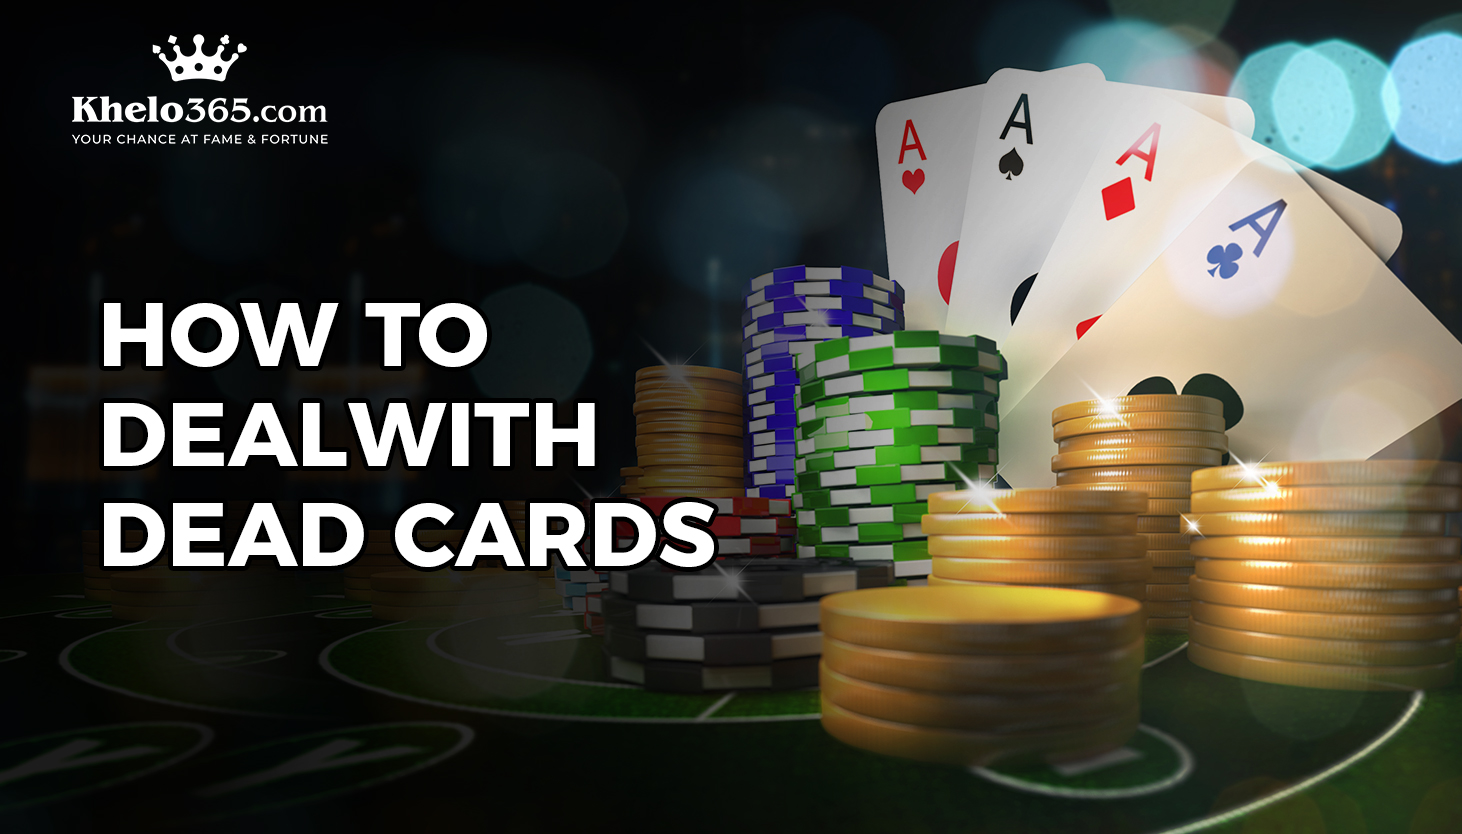 HOW TO DEAL WITH DEAD CARDS IN POKER